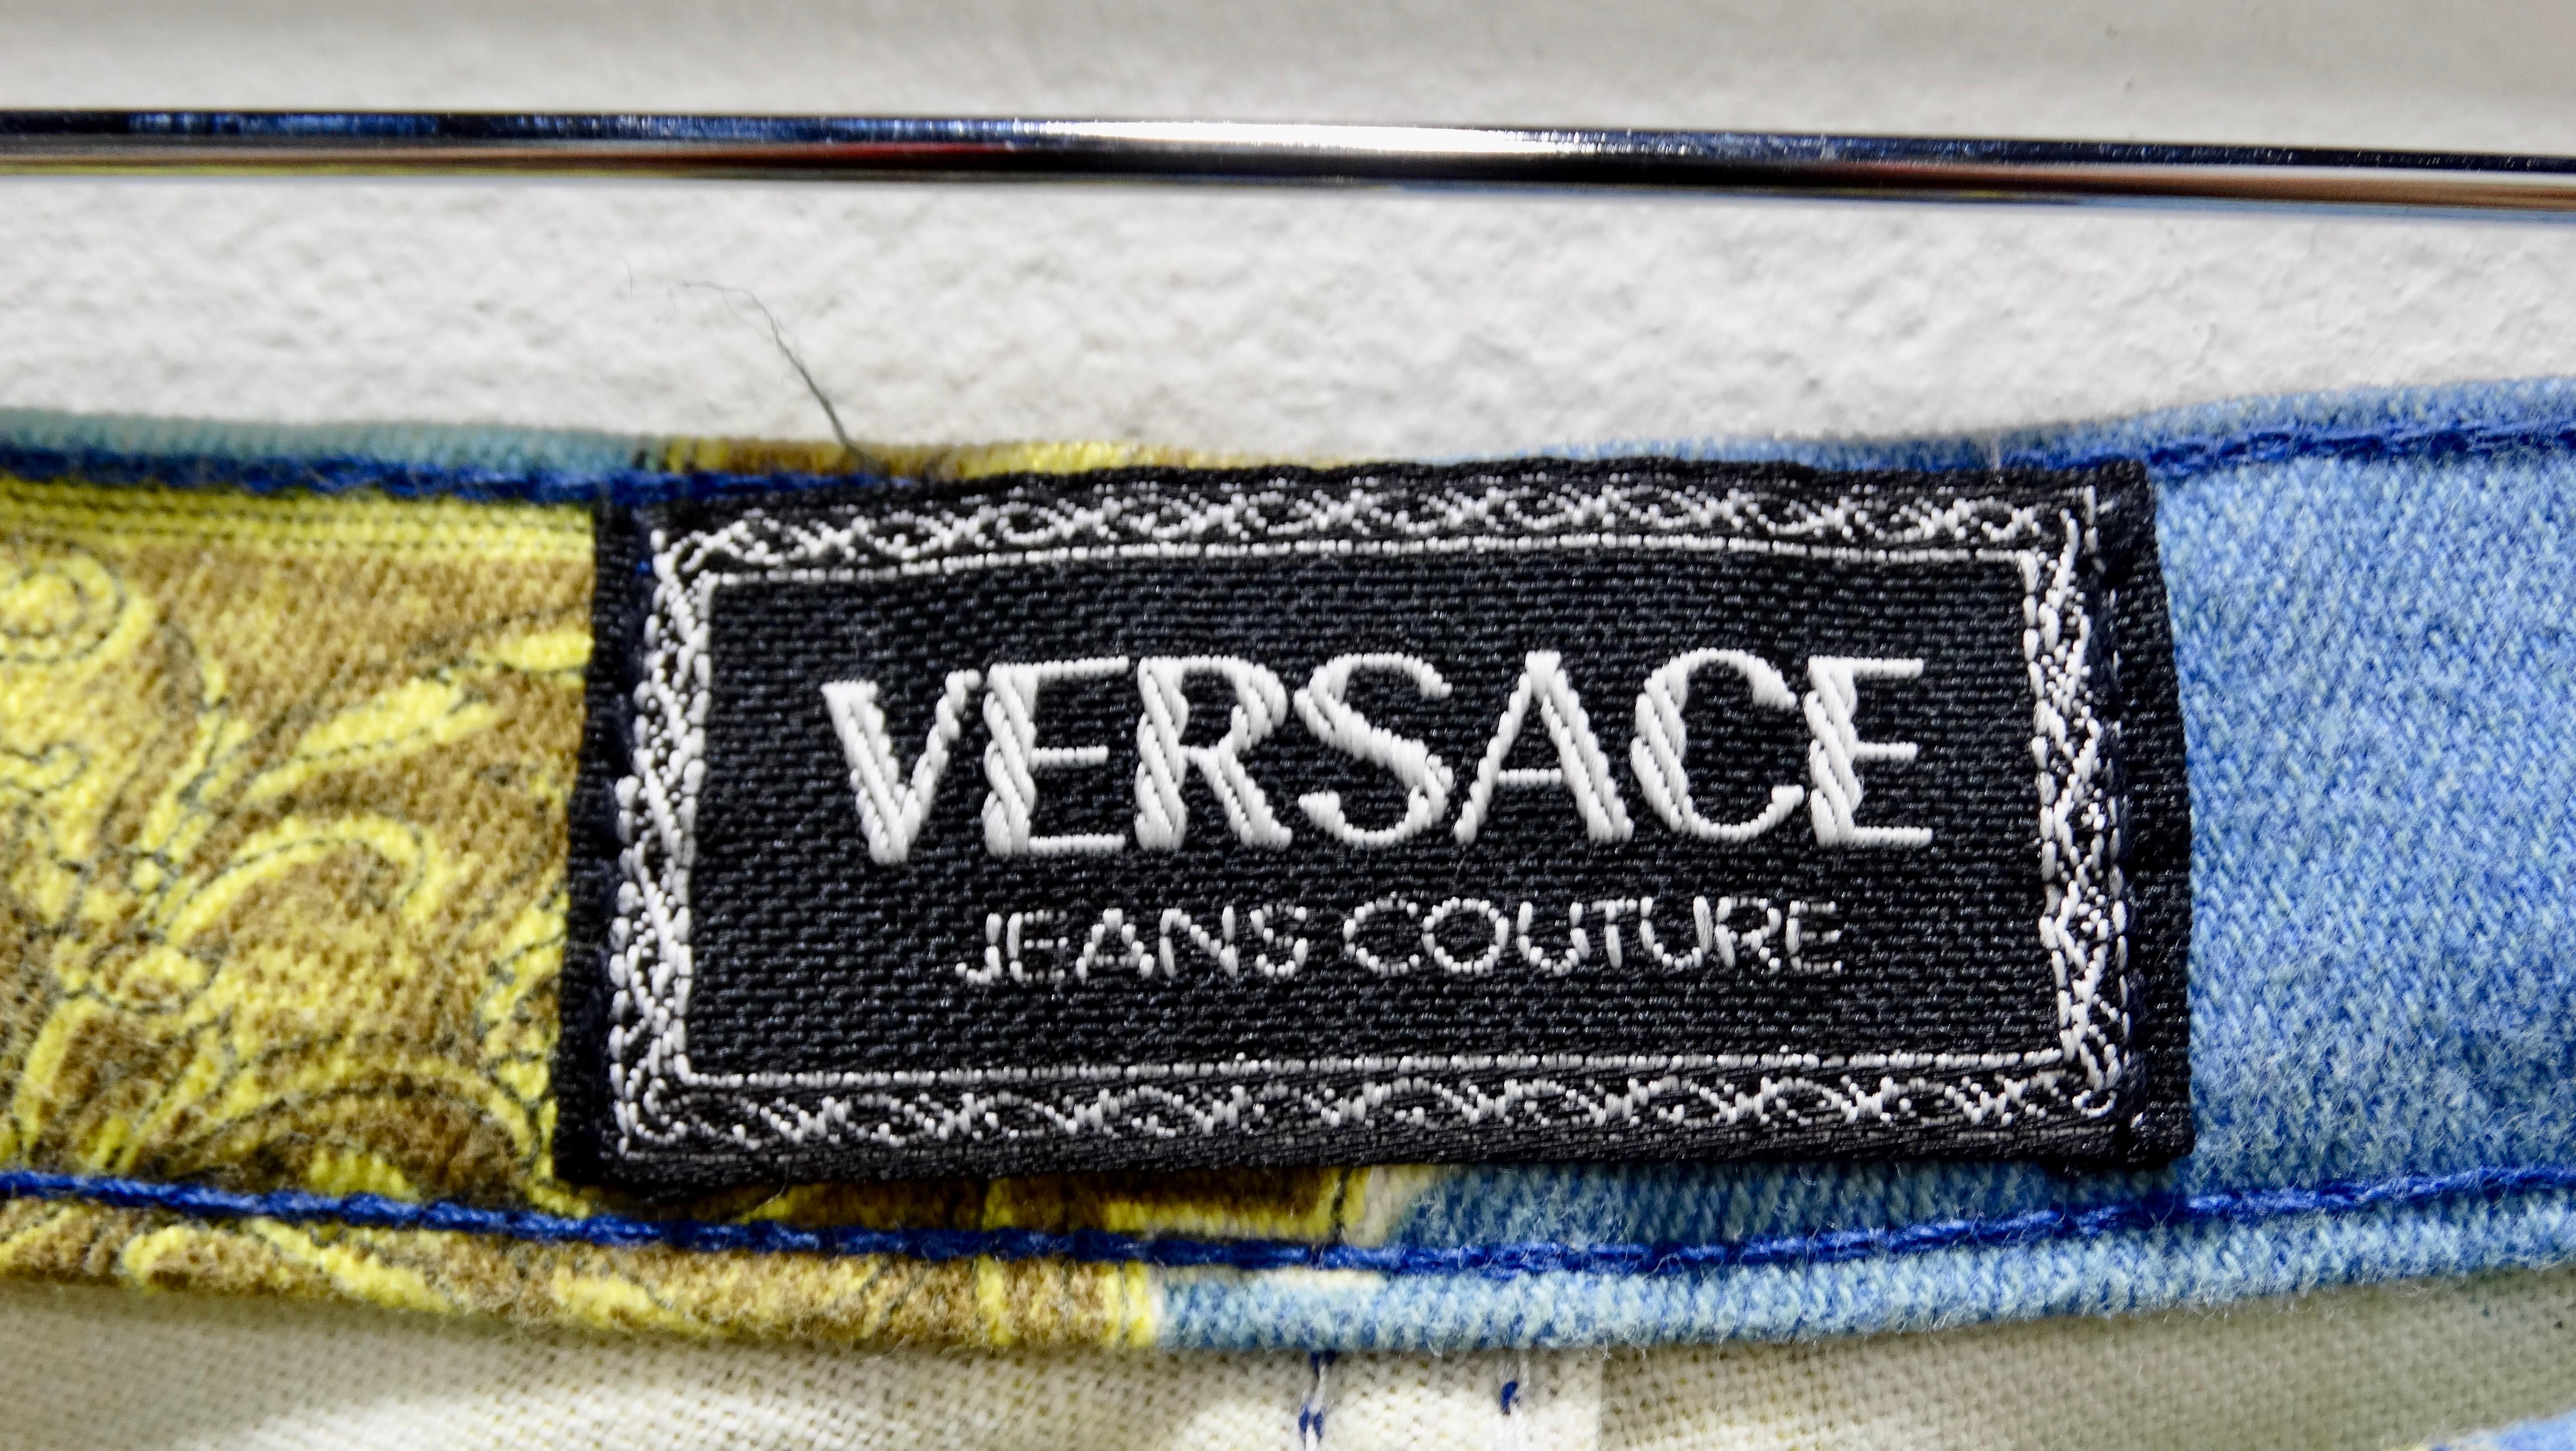 Gianni Versace Ocean Print Jeans For Sale 6